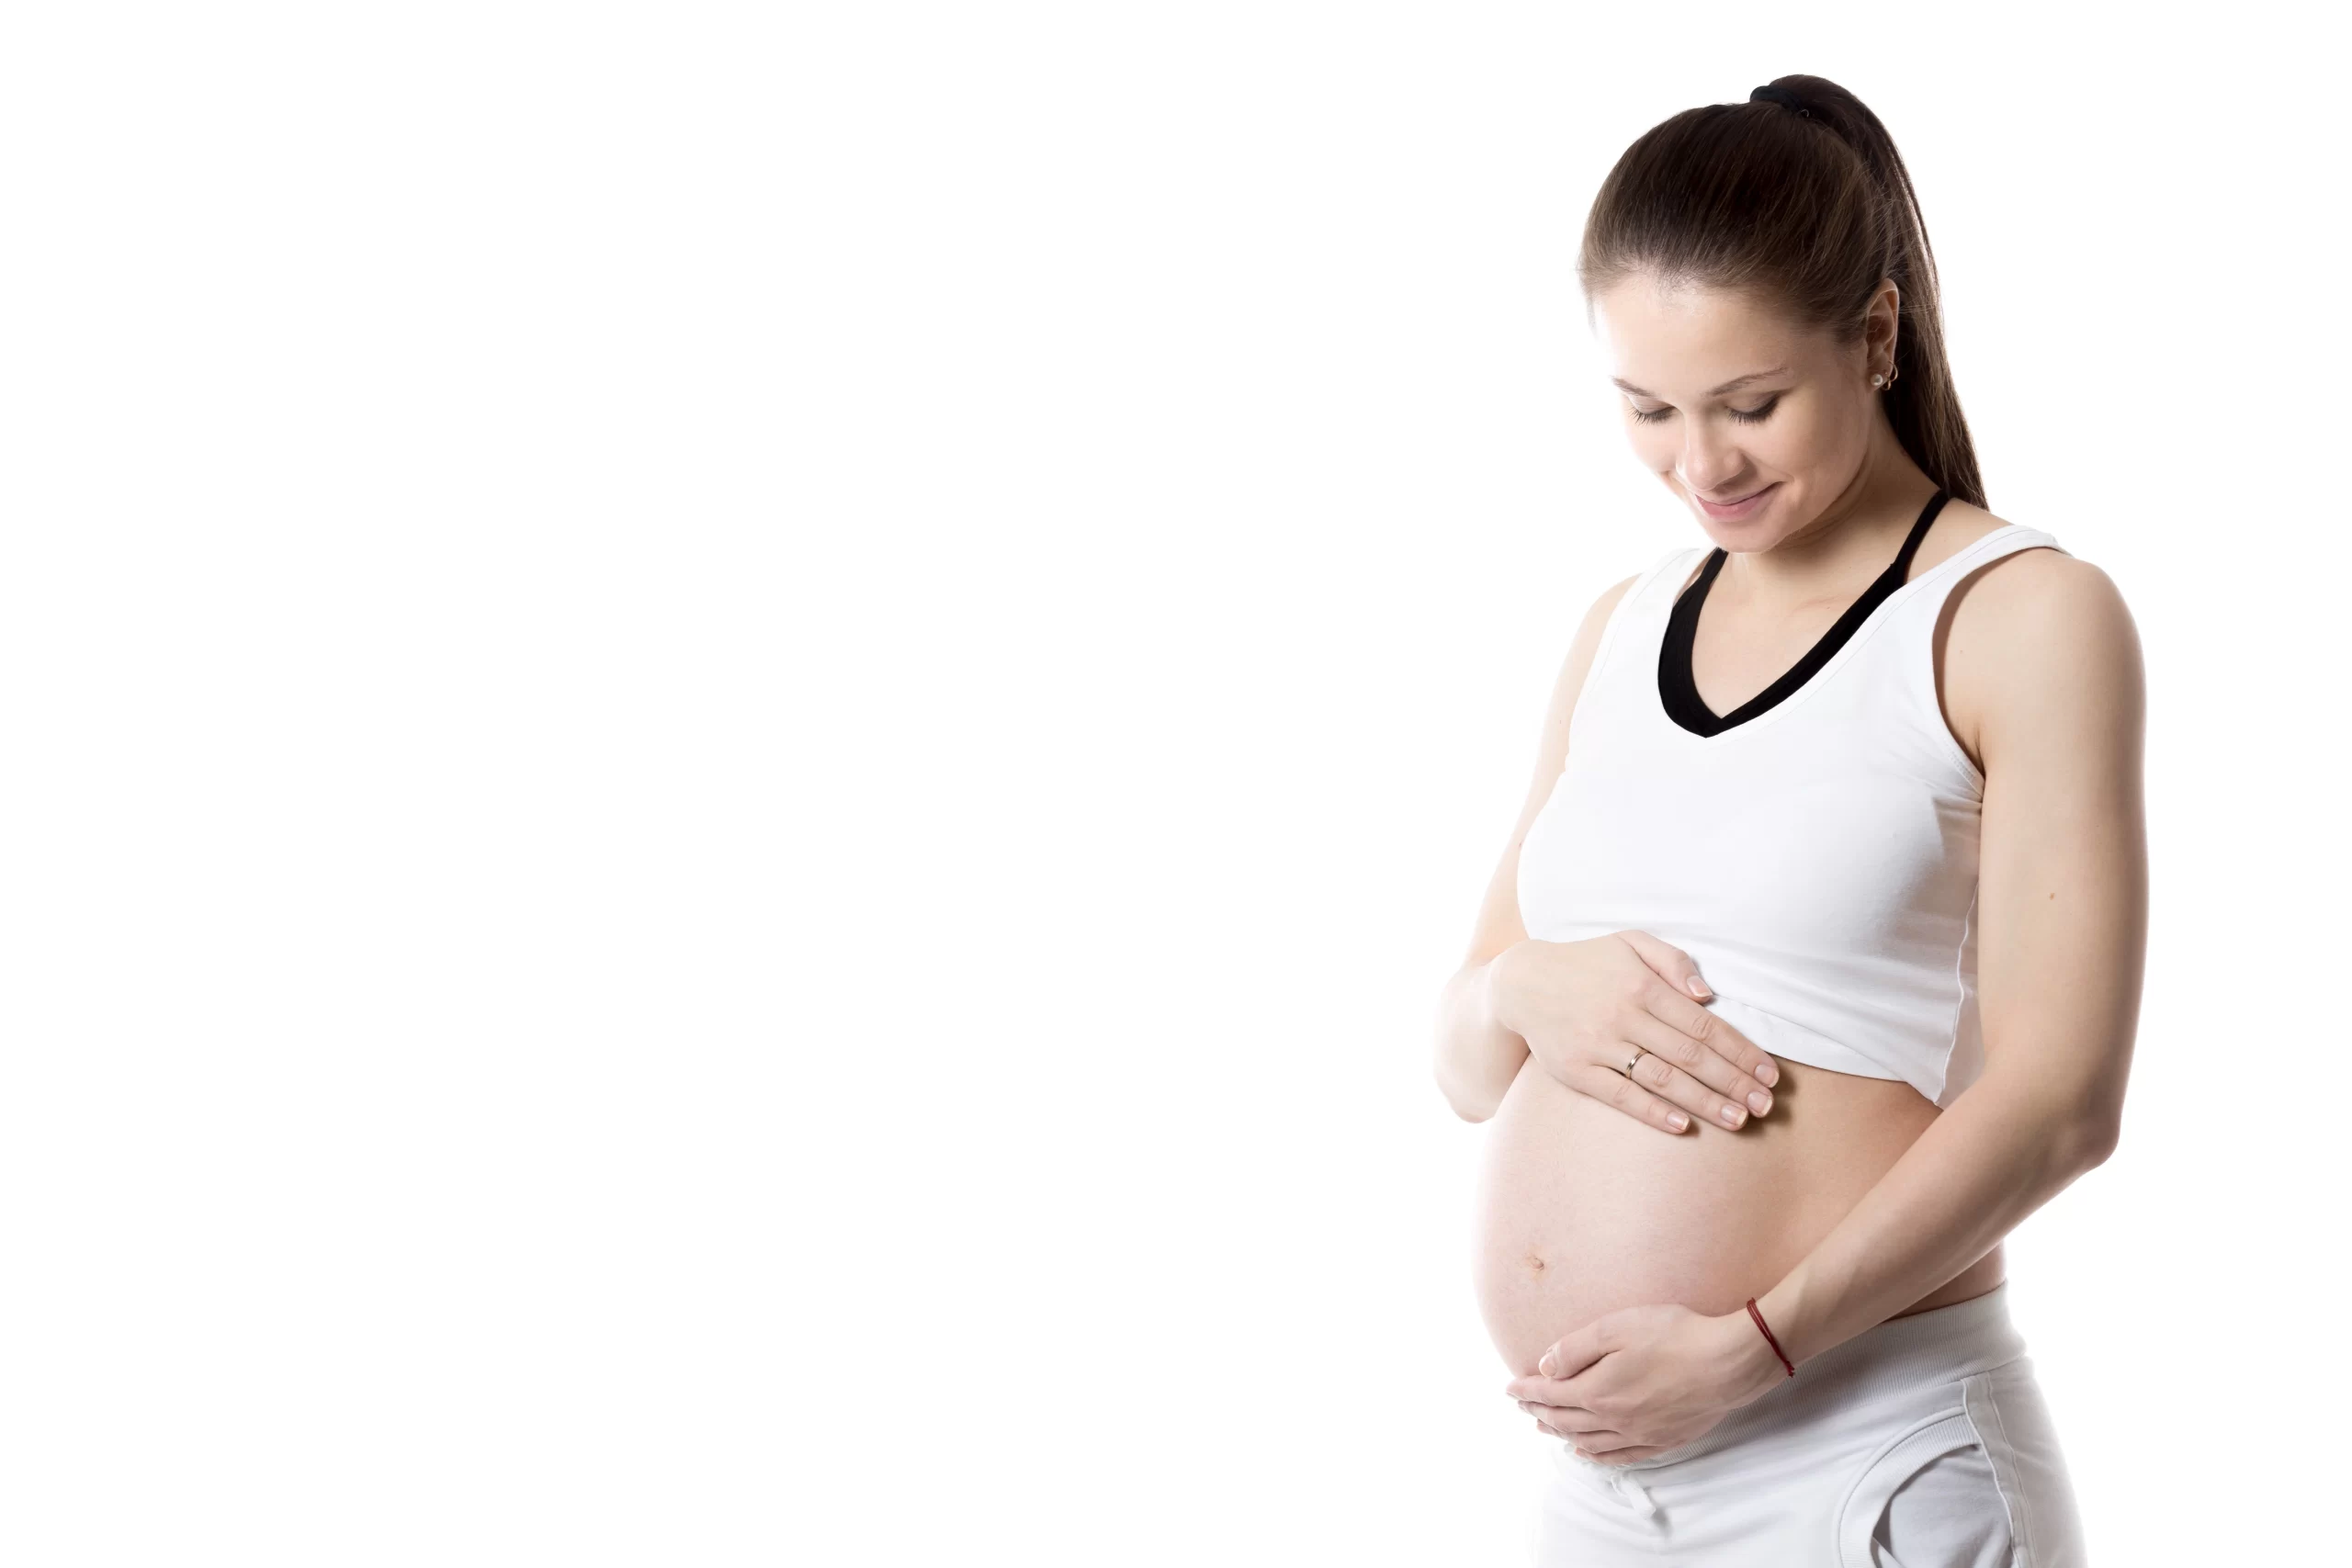 Prenatal Pollution Exposure and Lower Cognitive Scores